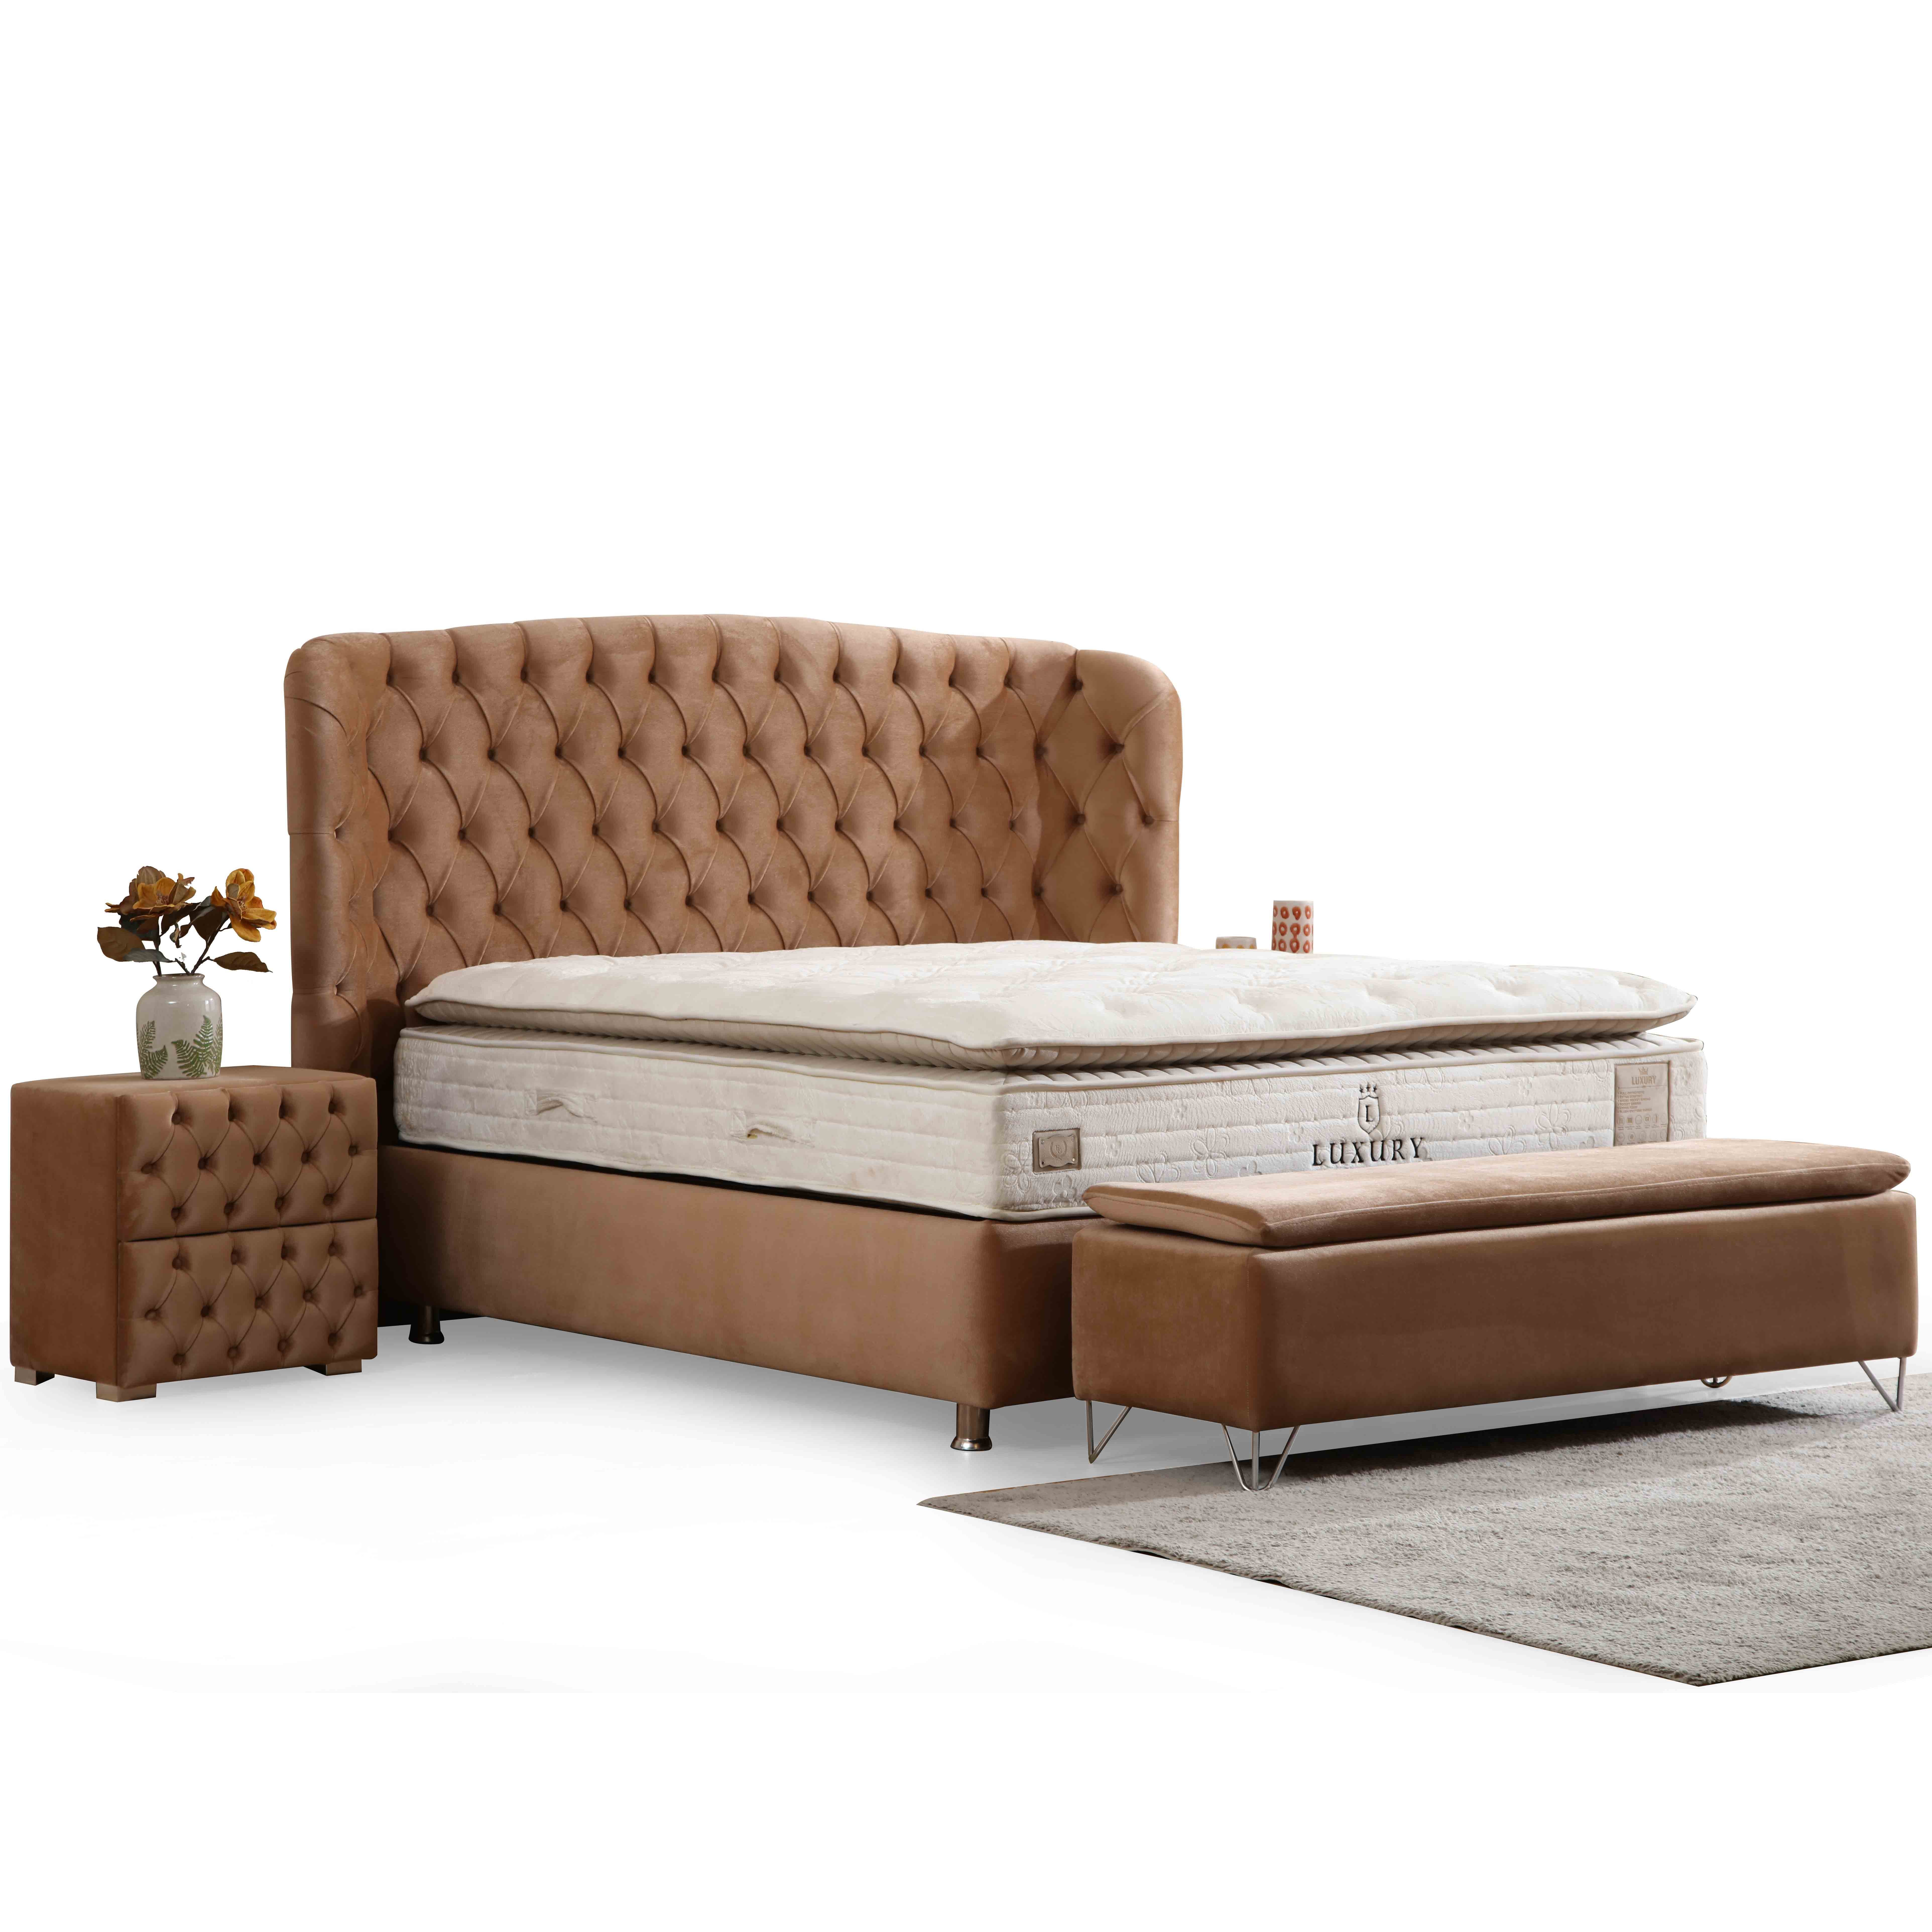 Riva Bed With Storage 180x200 cm